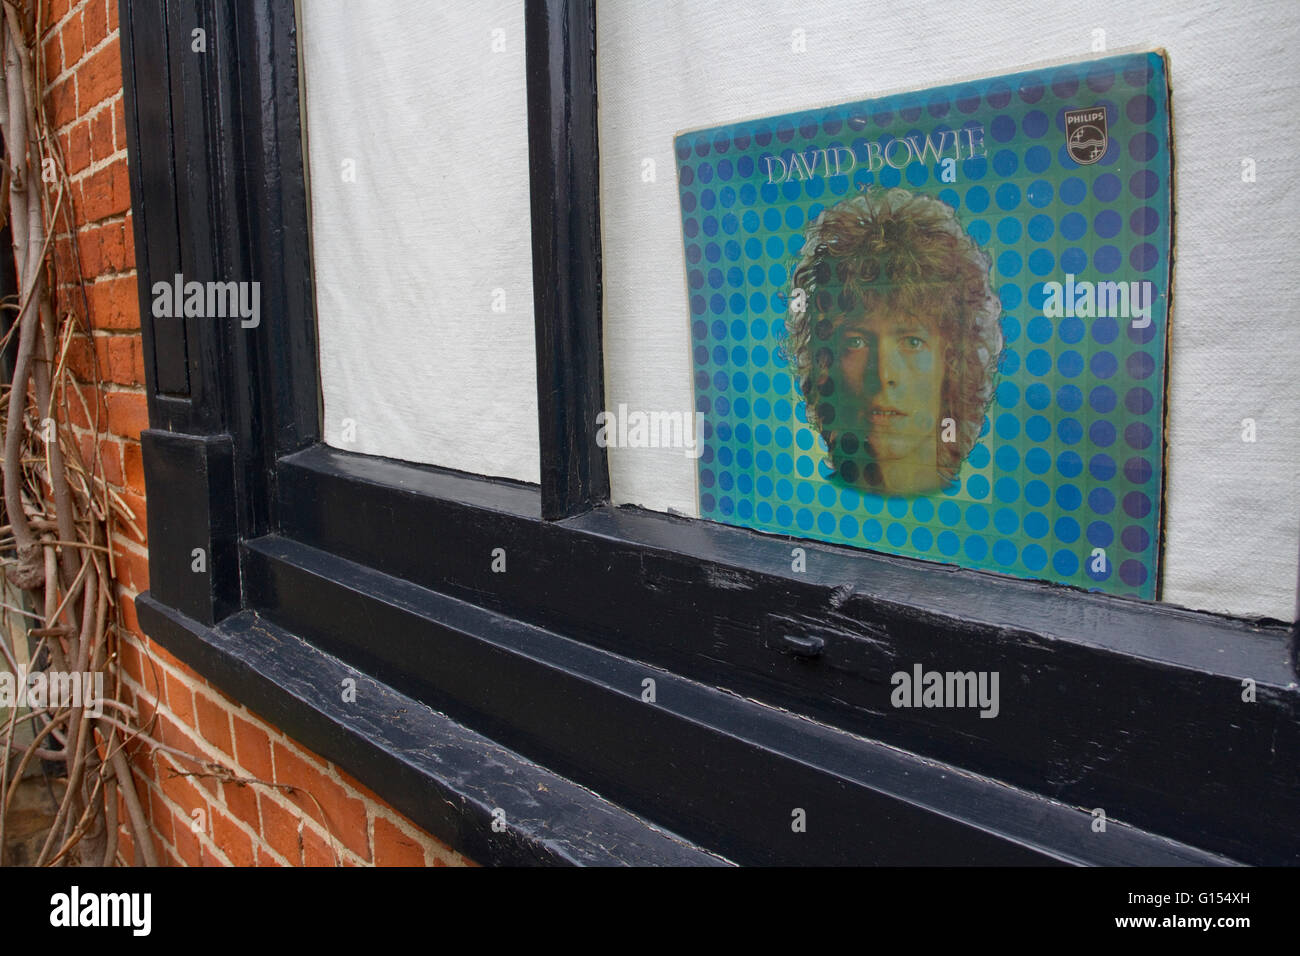 David Bowie album cover Space Oddity displayed in a window Stock Photo